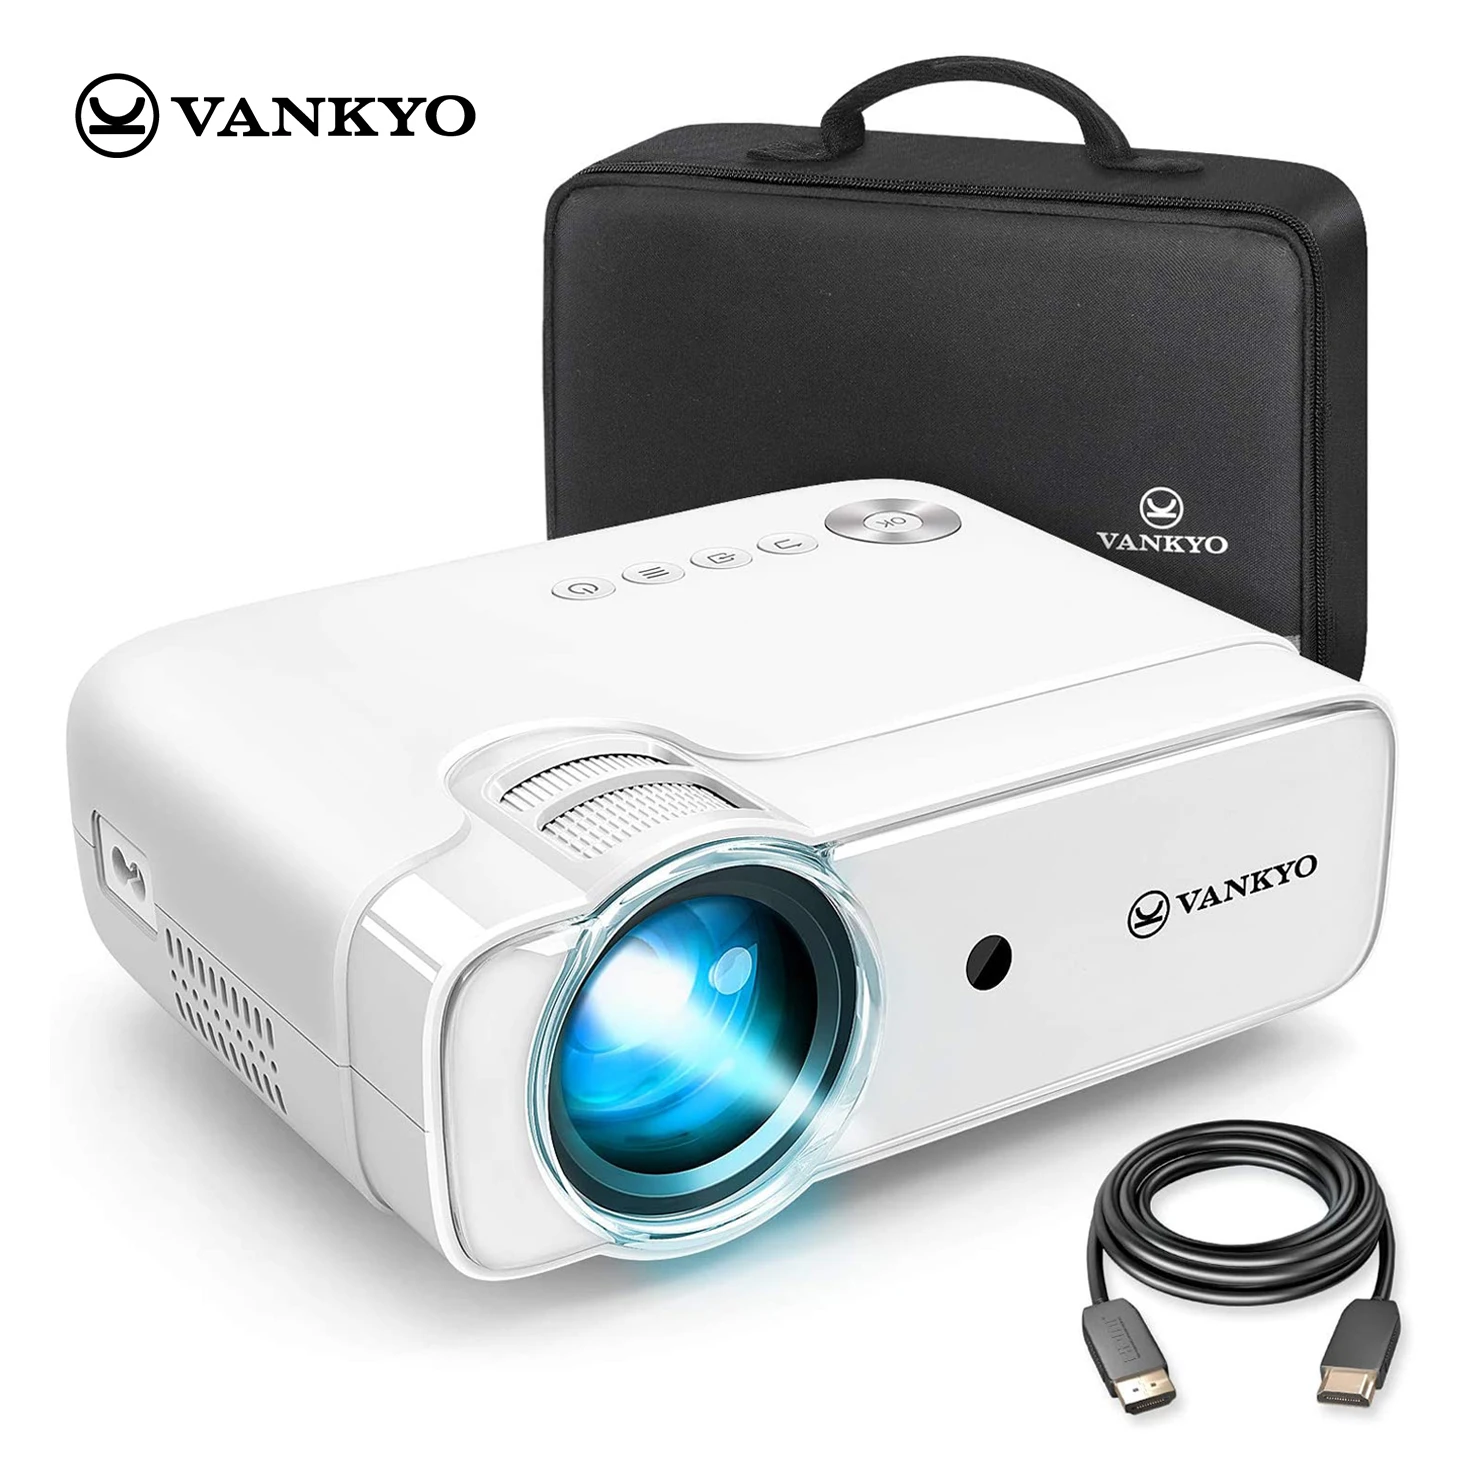 

VANKYO Leisure 430 LCD Projector Mini Video Projector with 50000 Hours LED Lamp Life 236" Display Compatible with HDMI SD AV